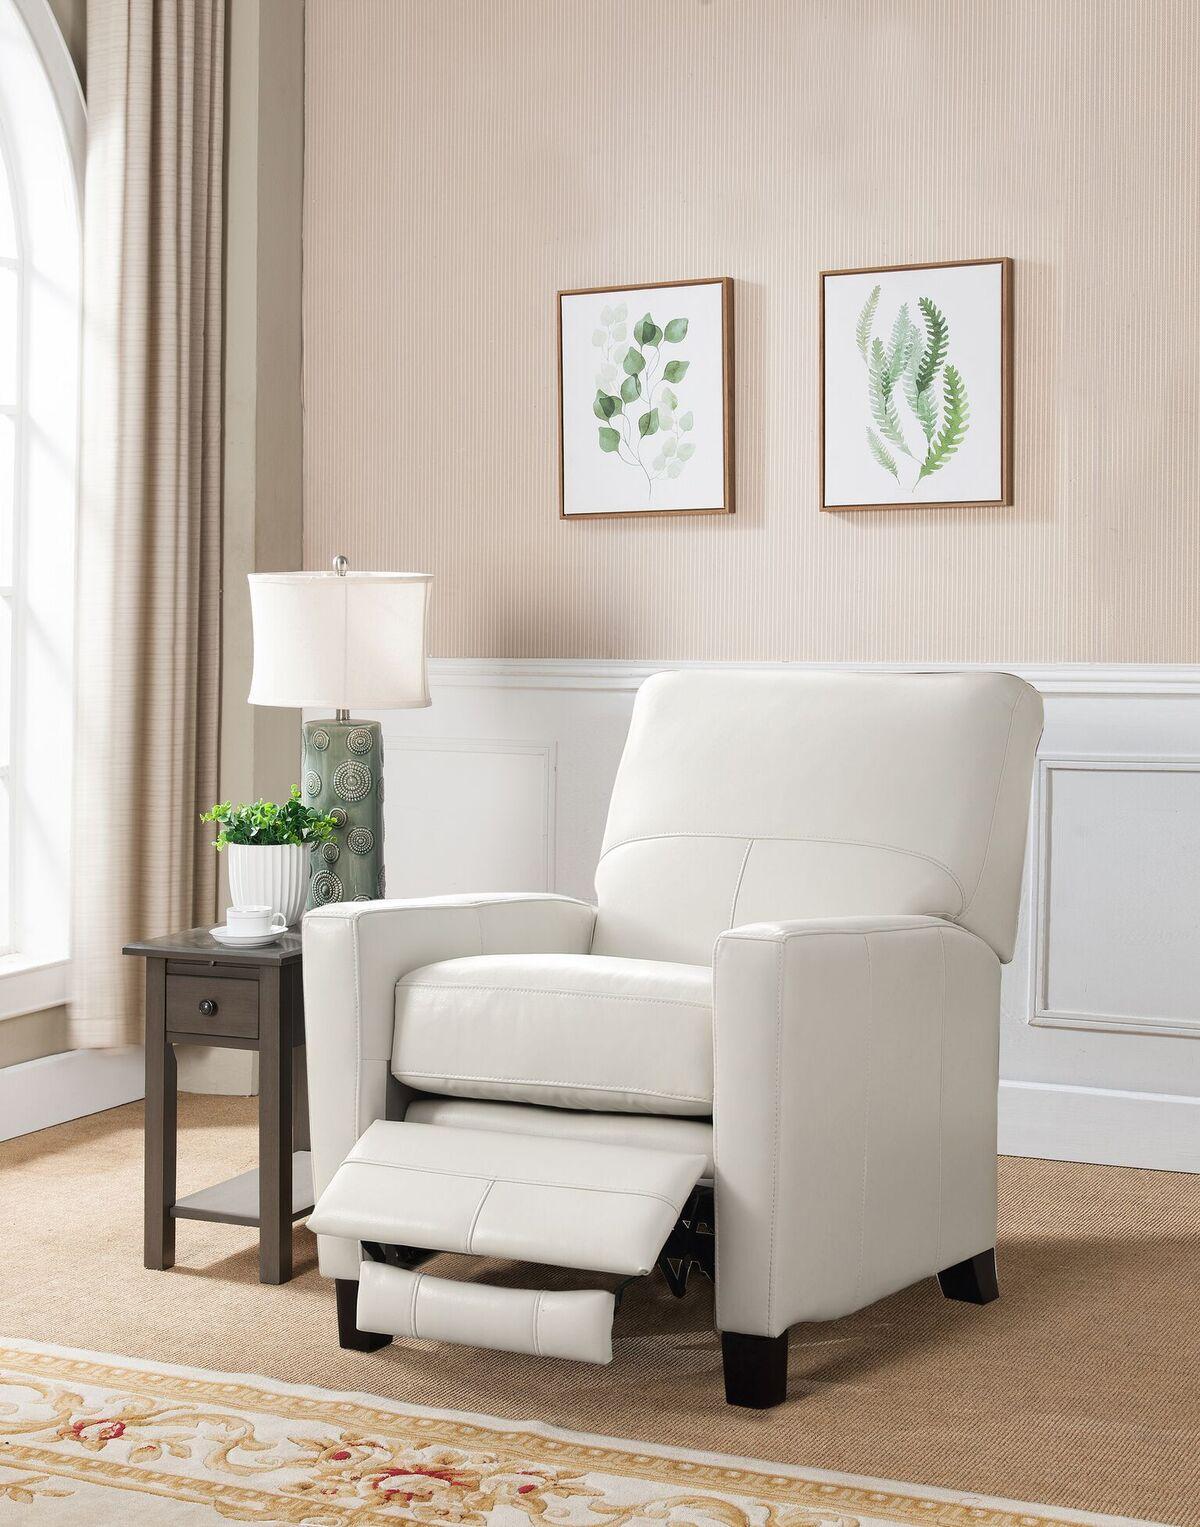 Contemporary, Modern Recliner Chair Hydeline Conway Conway-WHT in White Top grain leather